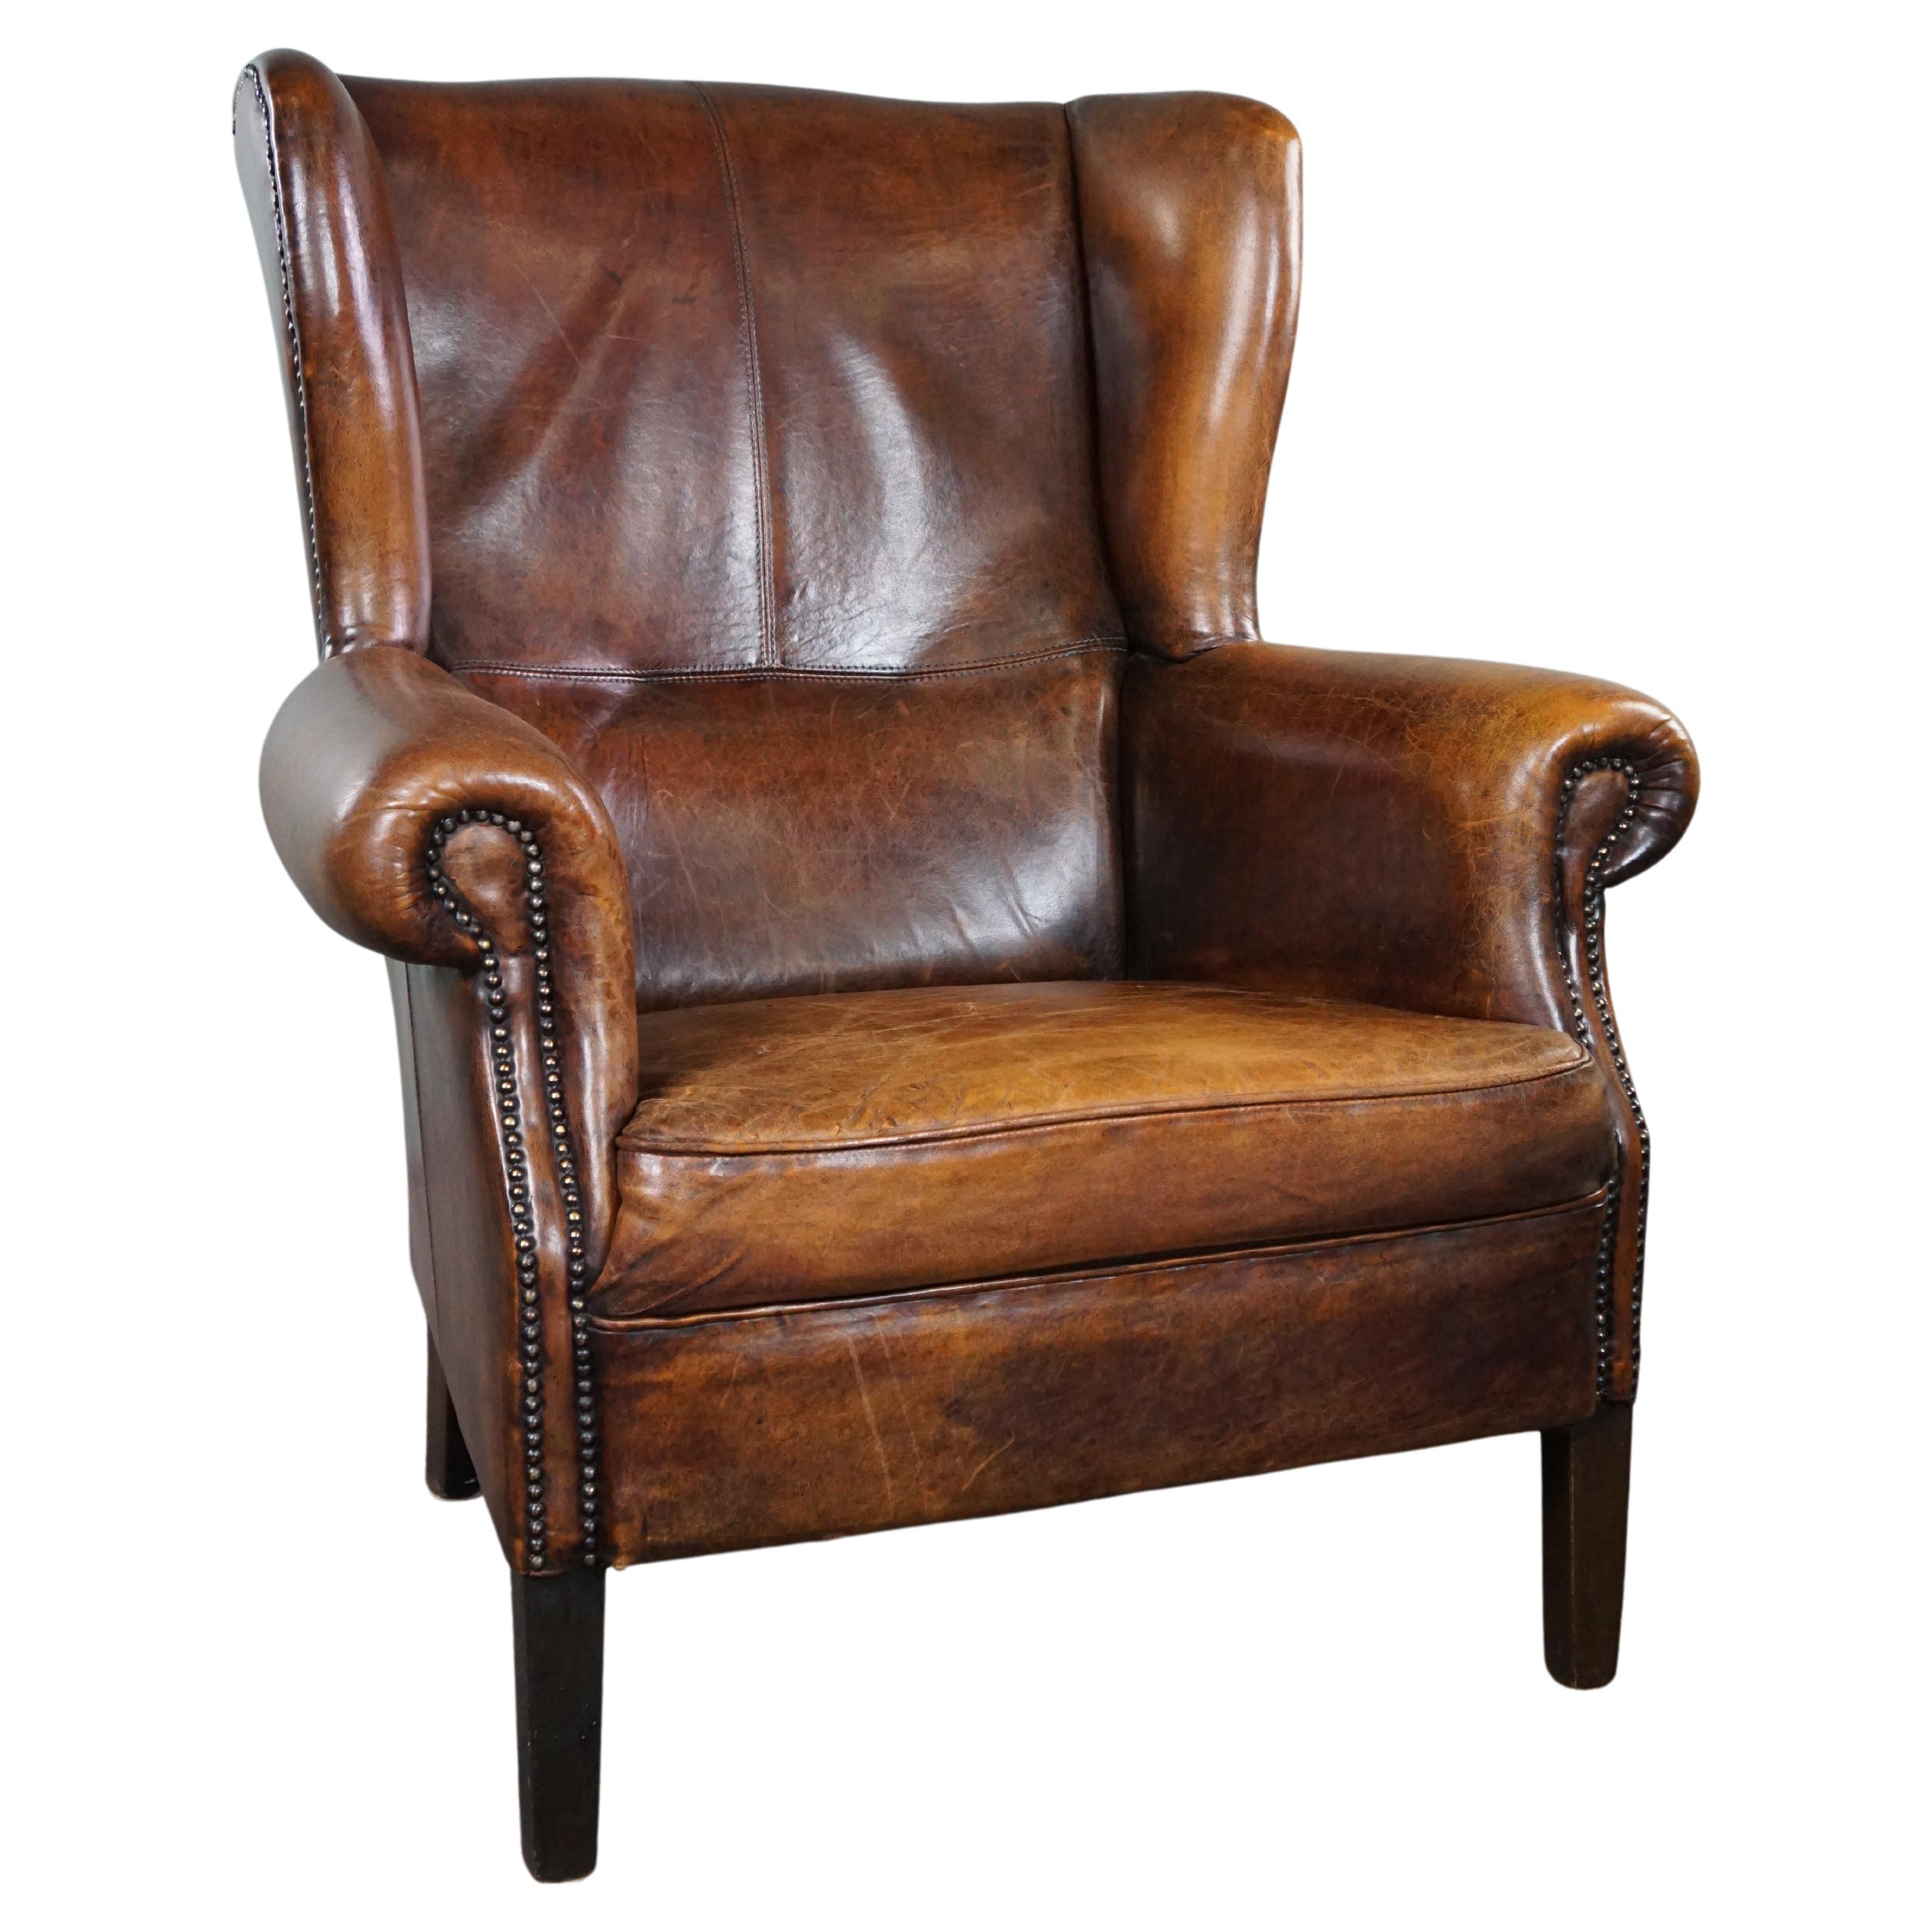 Beautiful dark wing chair made of sheep leather with beautiful colors For Sale